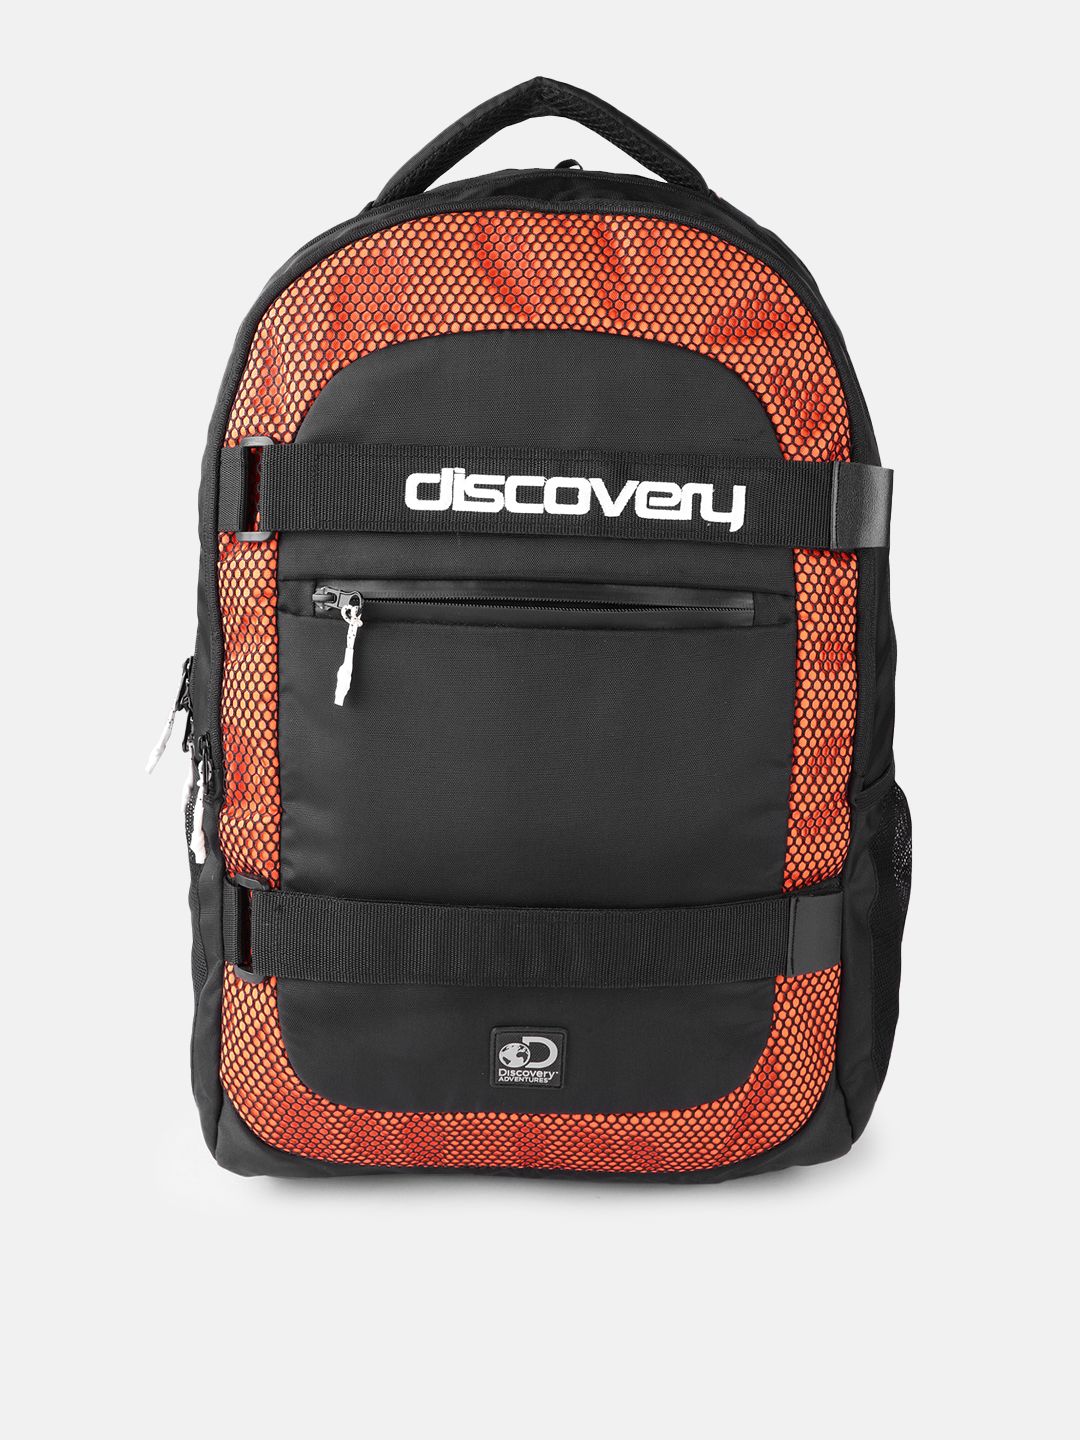 Roadster Unisex Black & Orange Colourblocked Discovery Band Backpack Price in India